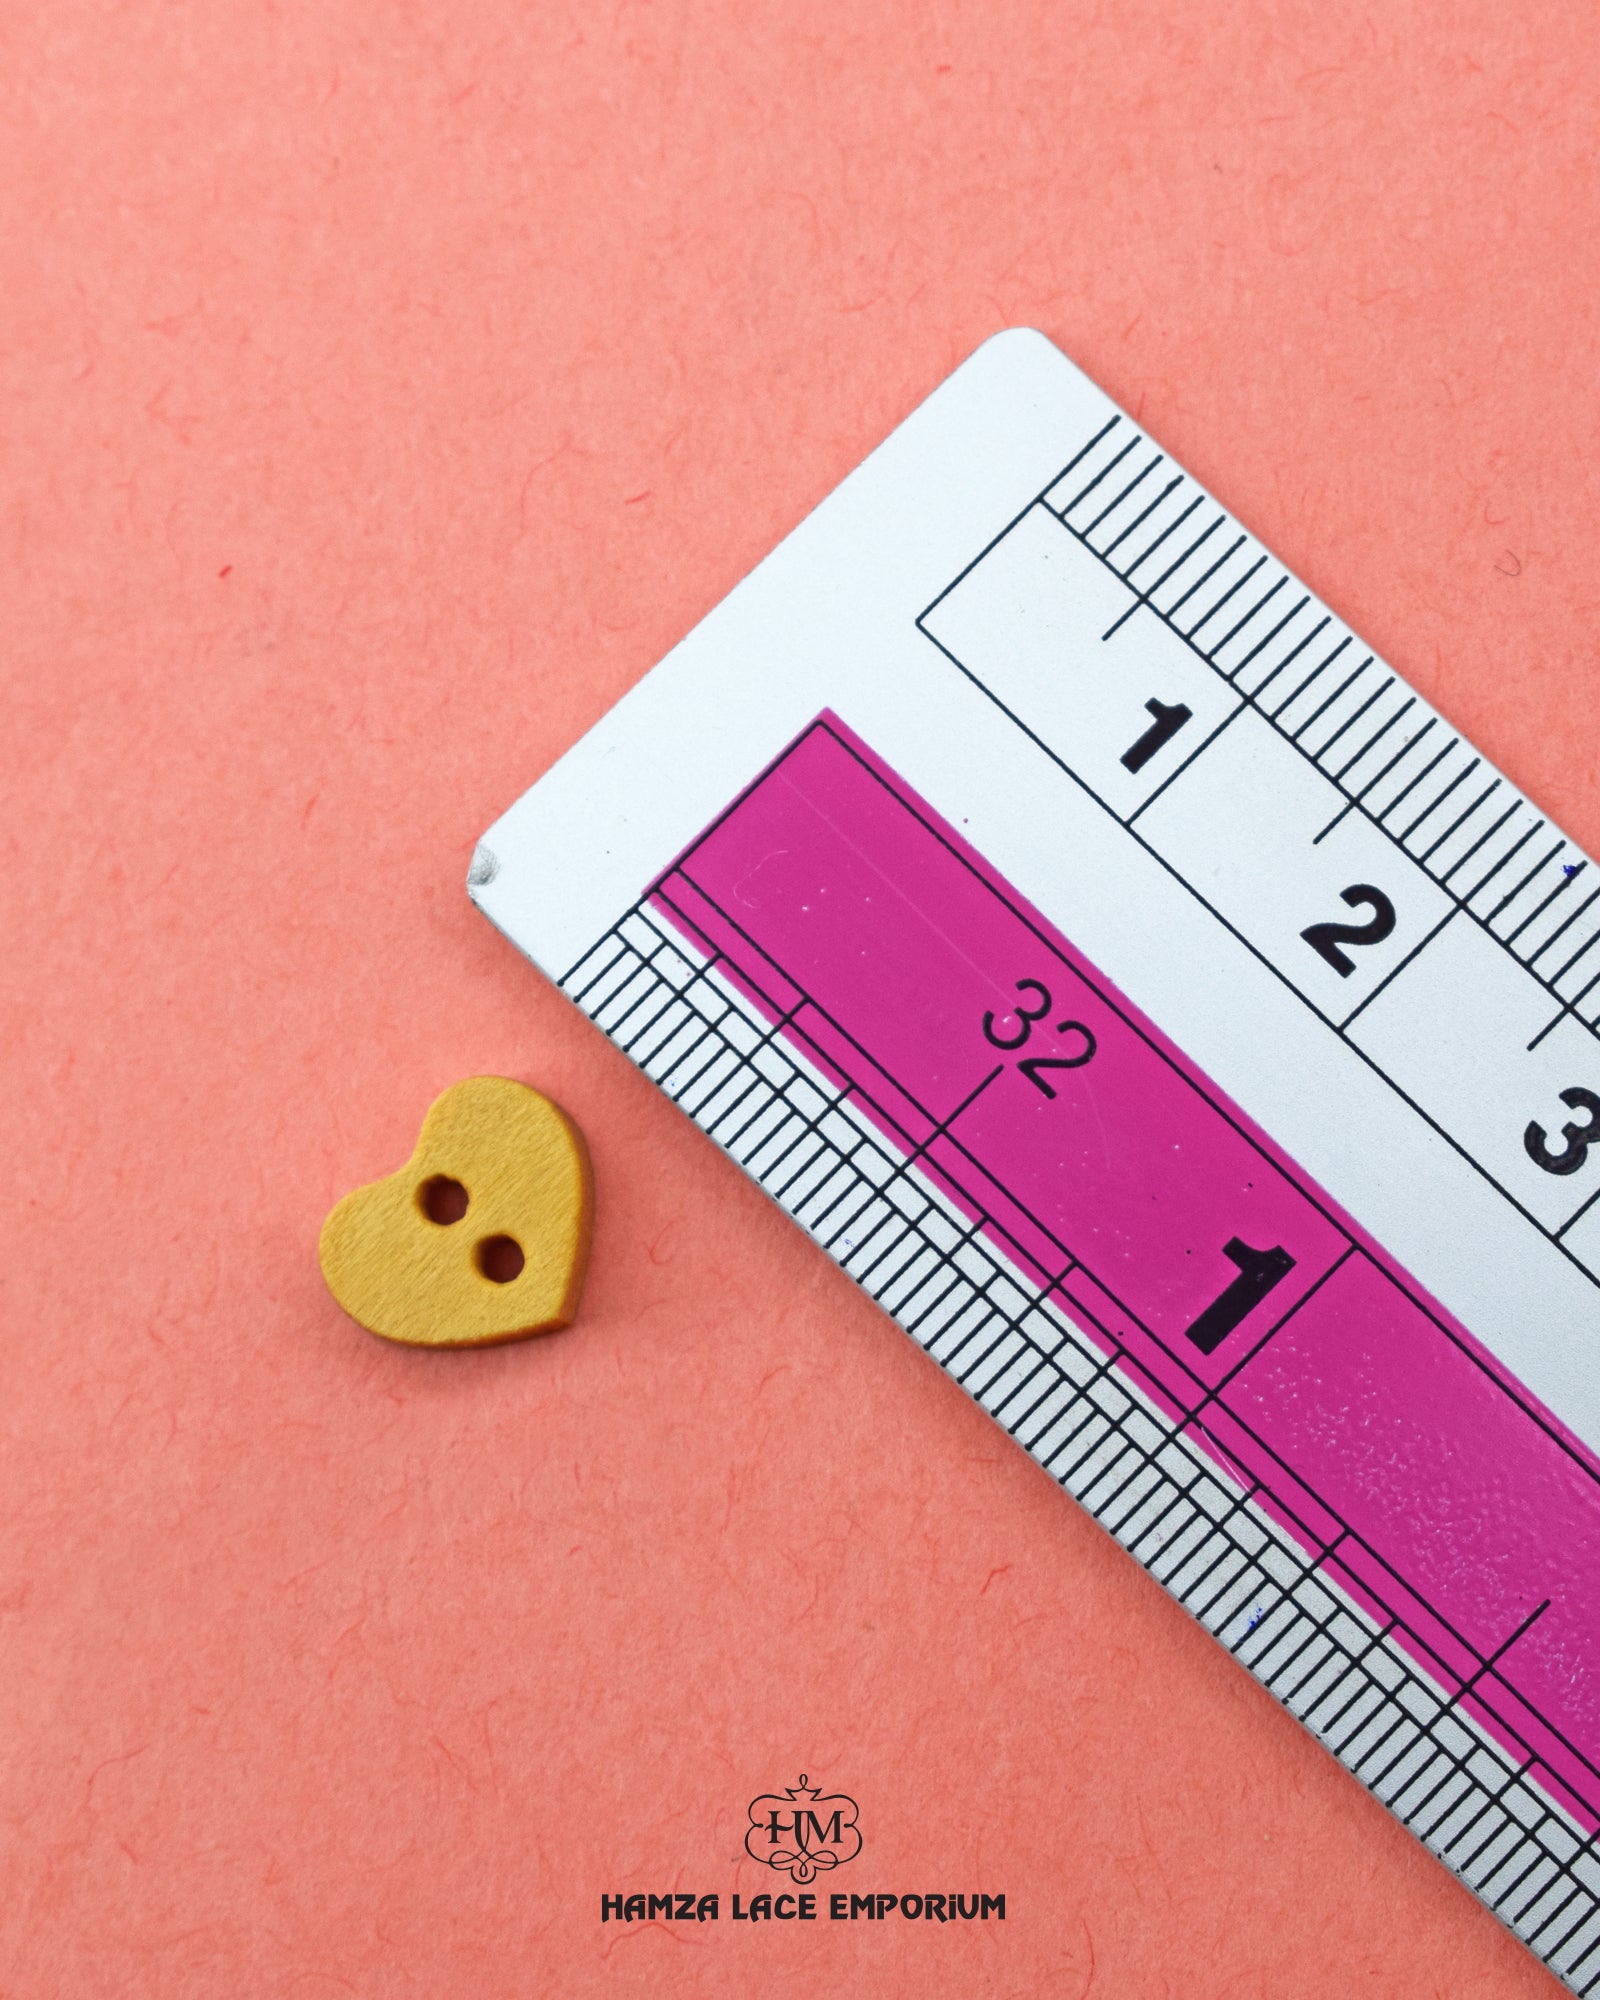 Size of the 'Heart Design Wood Button WB71' is shown with a ruler